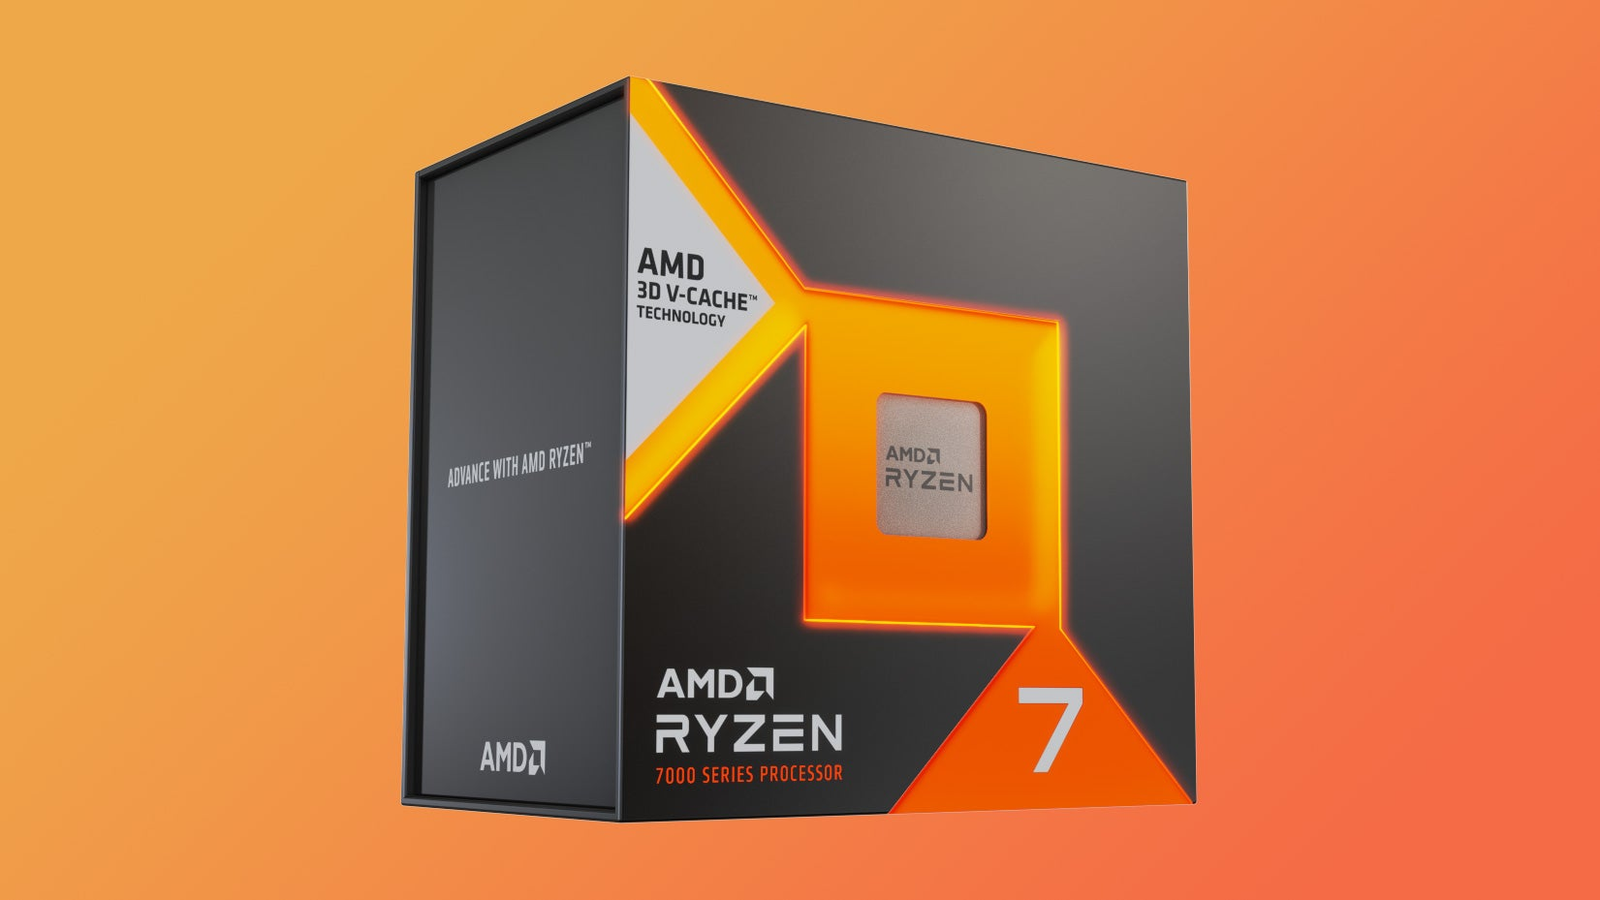 Ryzen 7 7800X3D: 5 things you must know about AMD's gaming CPU